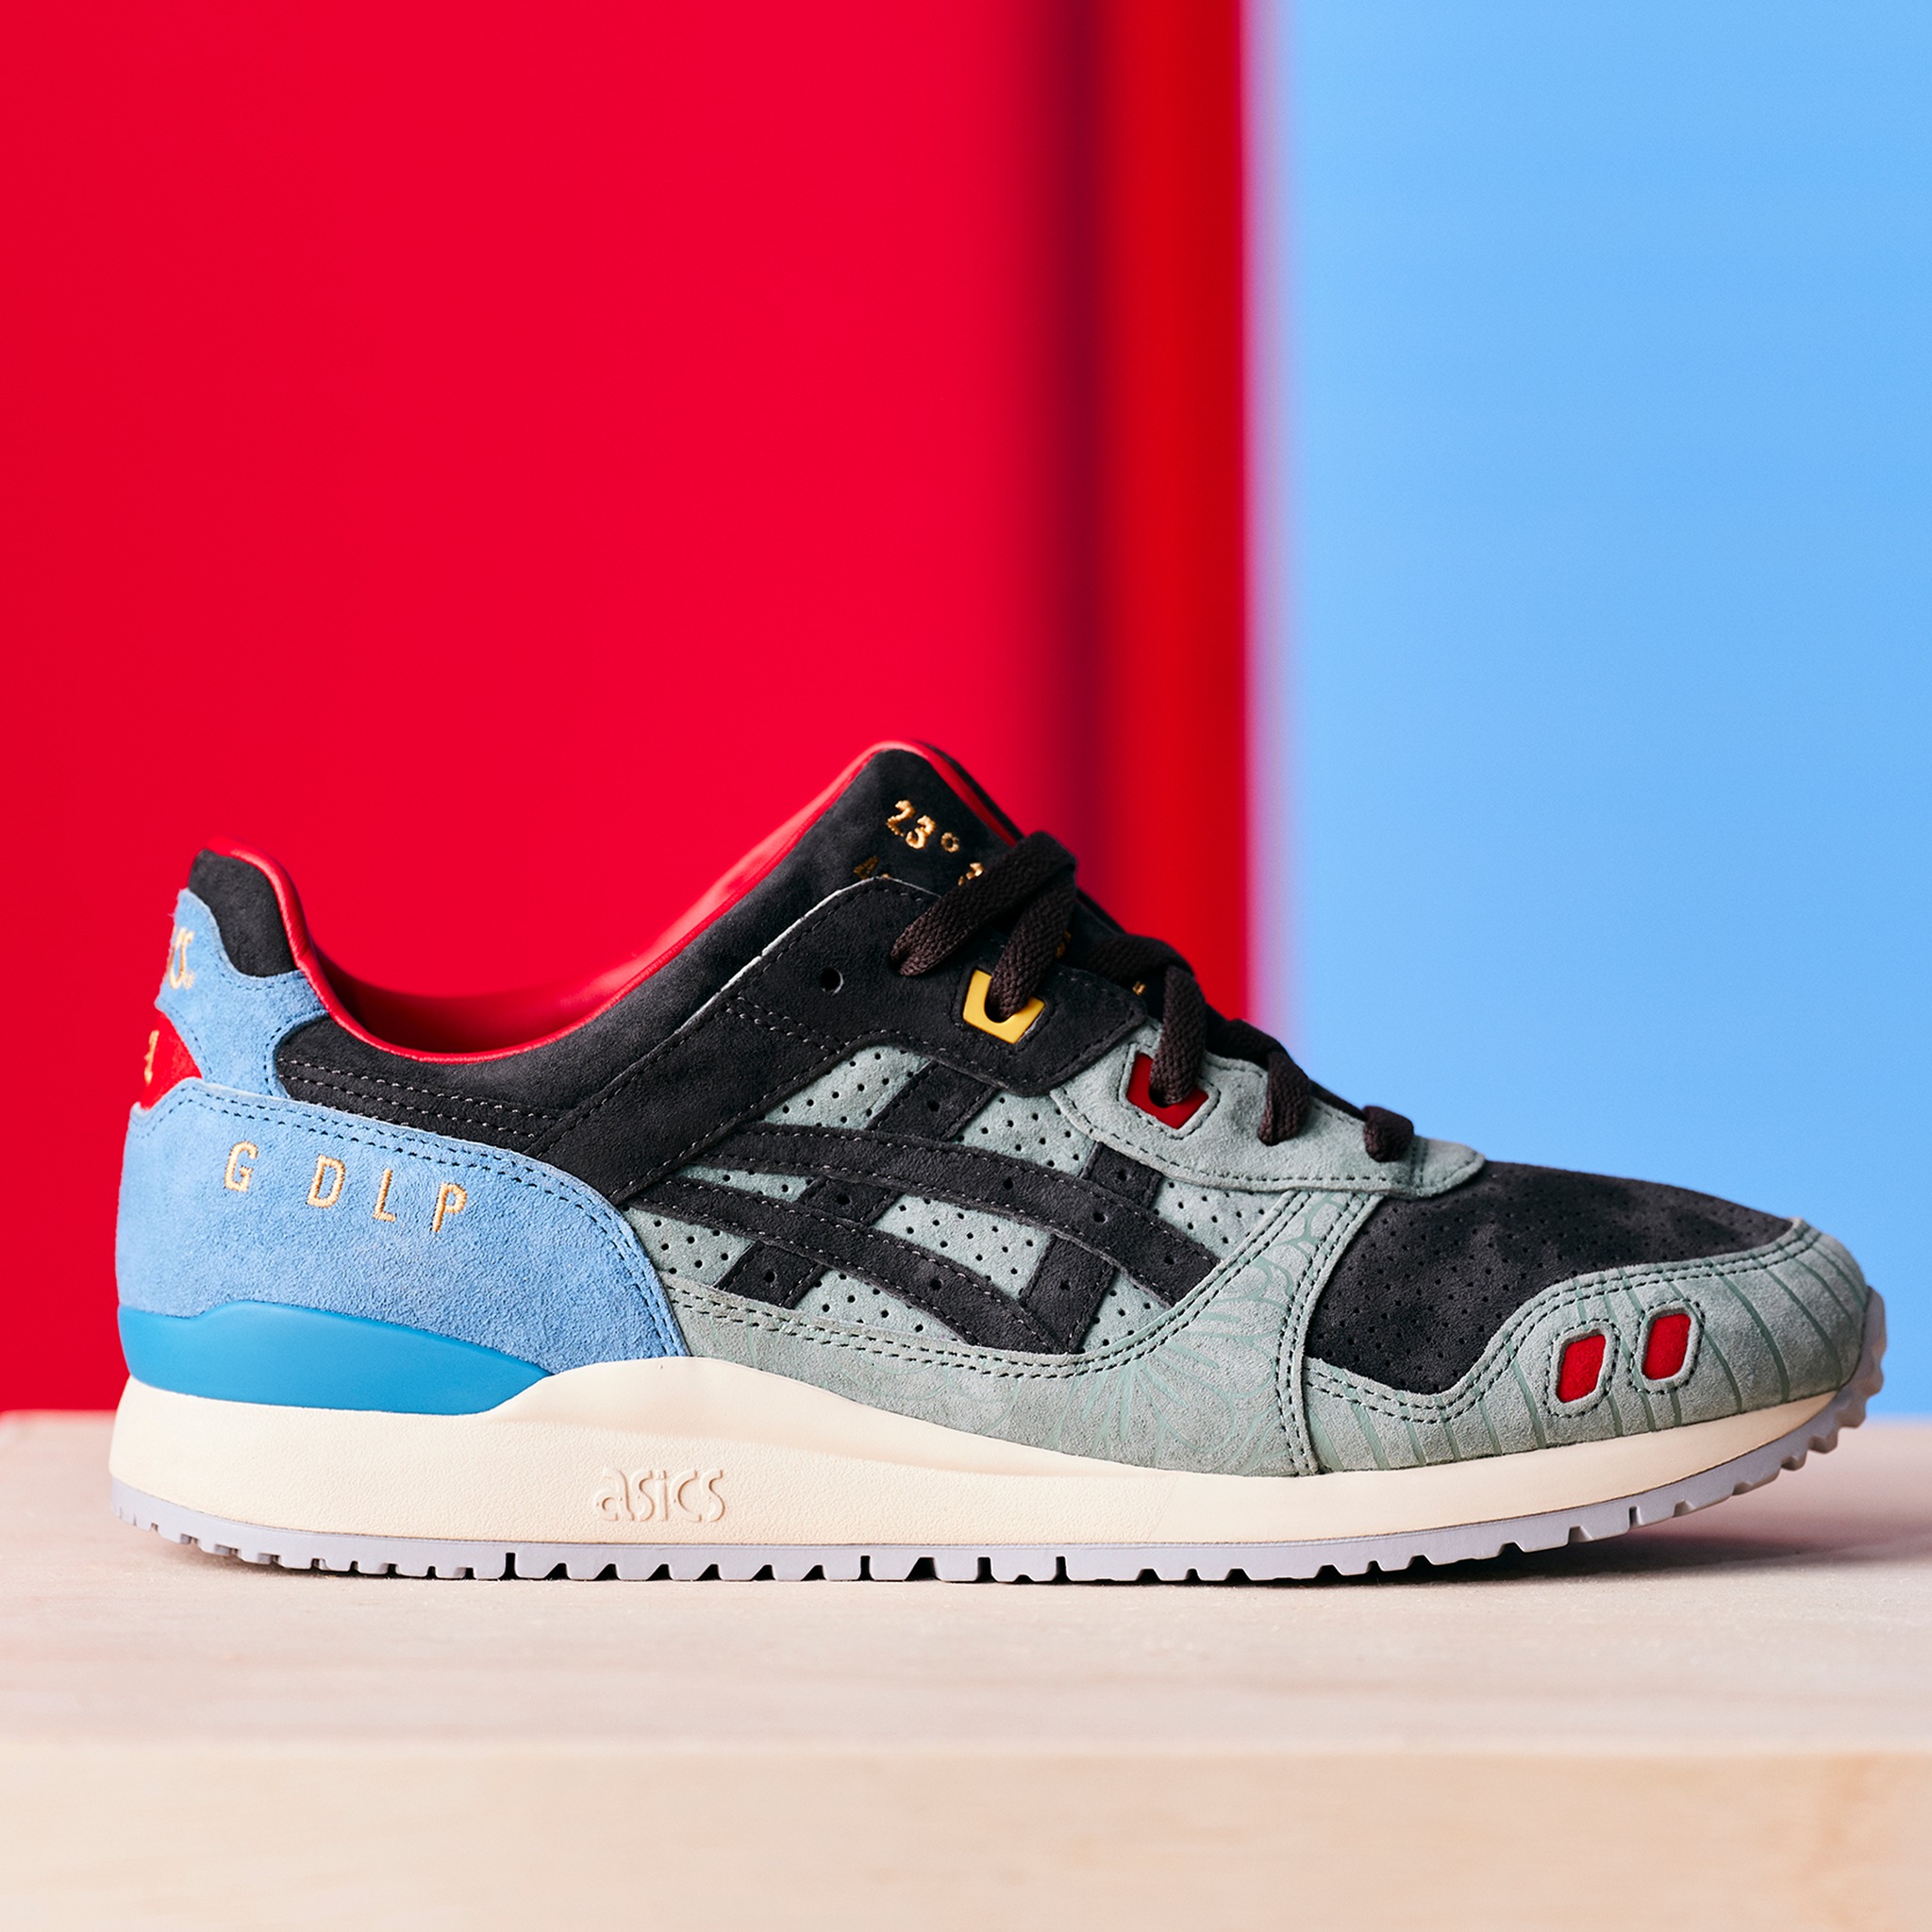 Gum sunflower Labor that Asics is an acronym and it stands for the Latin phrase - LYTE III  "Tropicália" Info - Guadalupe (GDLP) x ASICS GEL